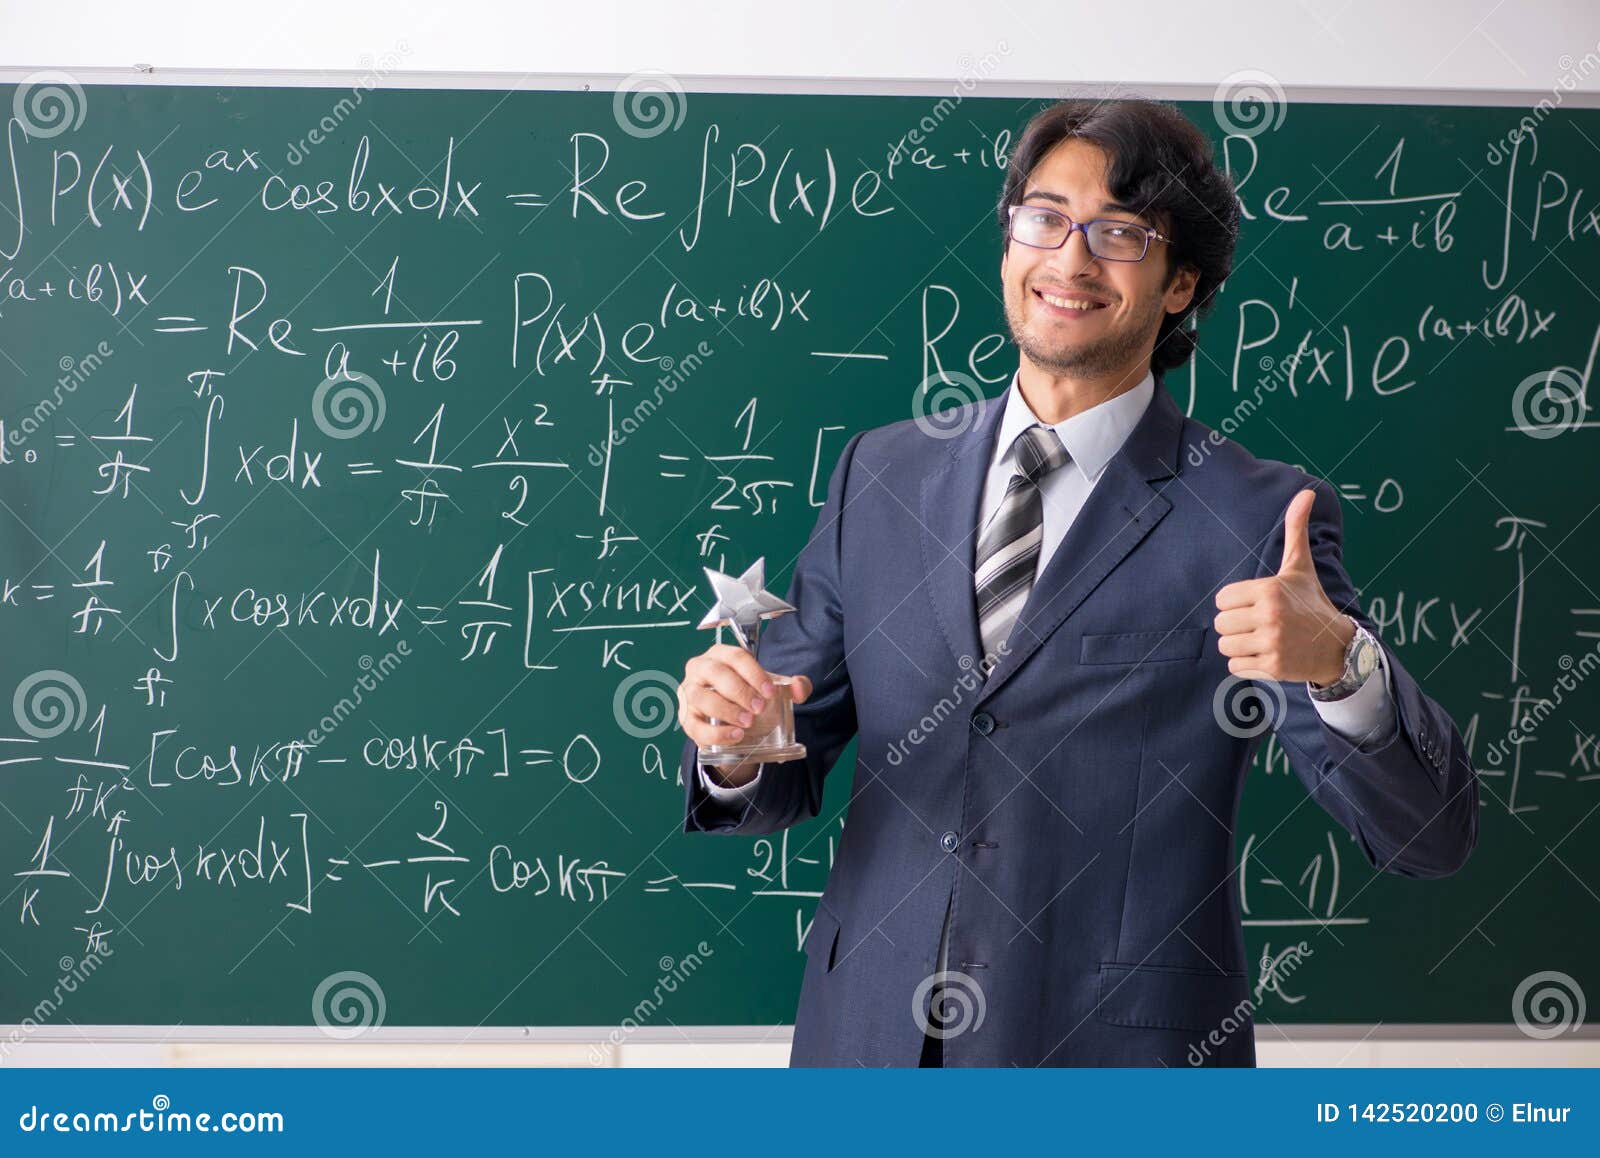 A math teacher standing in front of a blackboard full of math equations, holding a trophy, and giving a thumbs up.